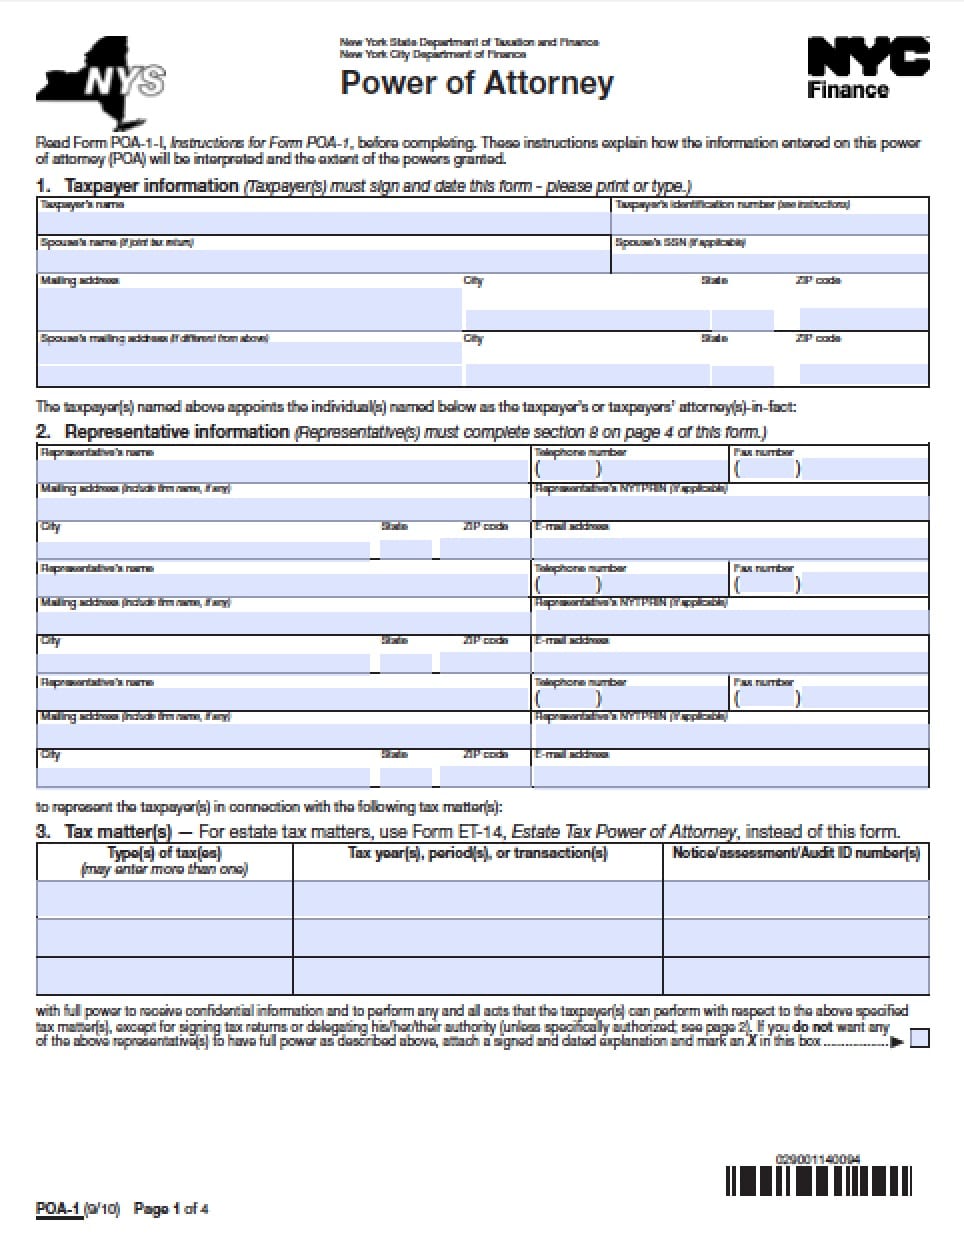 New York Tax Power of Attorney Form Power of Attorney Power of Attorney